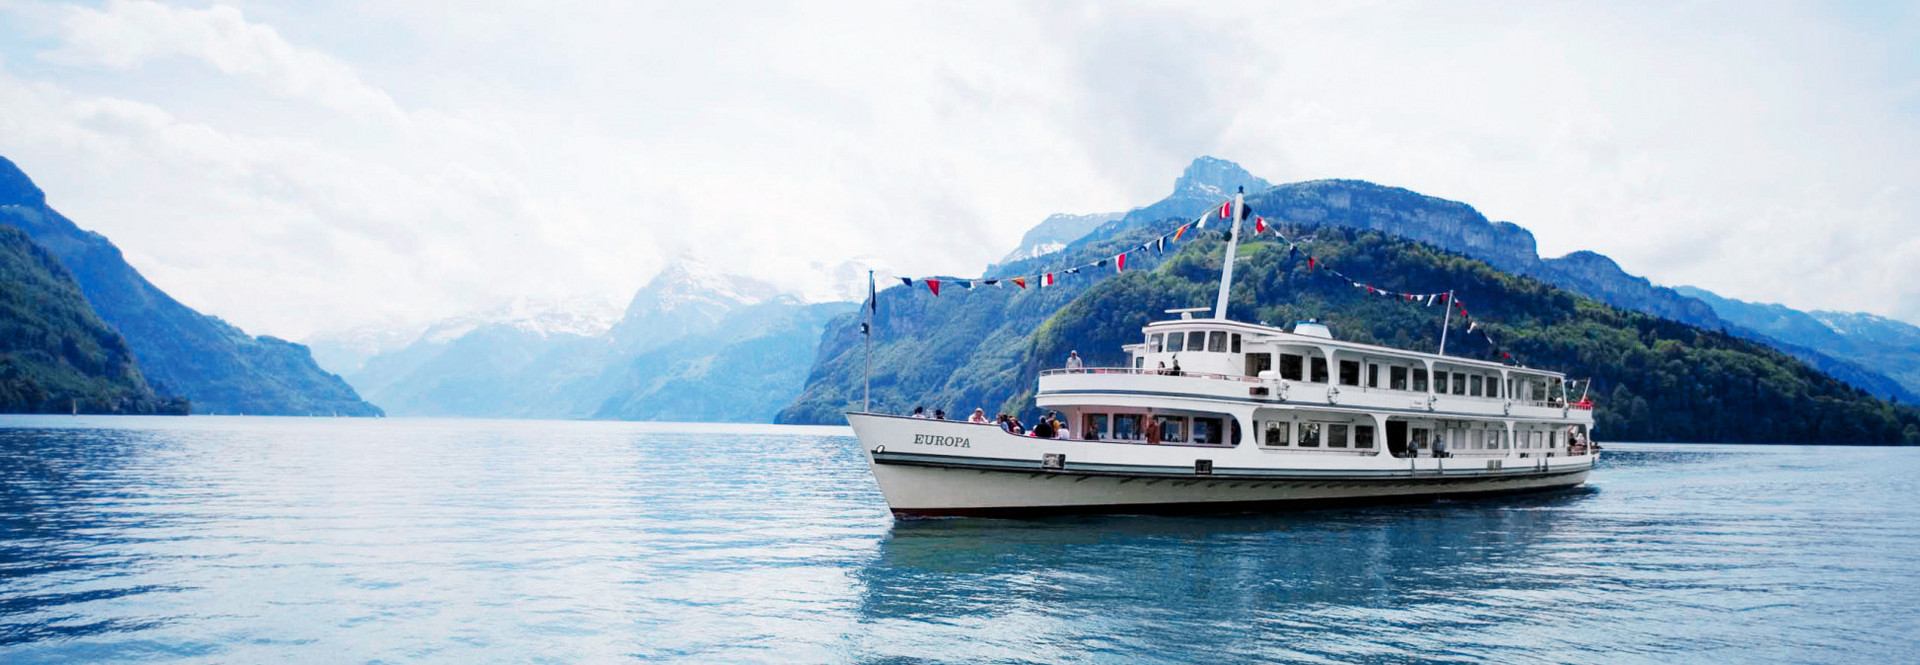 The motor vessel Europa with fixed flags during a cruise on Lake Lucerne.